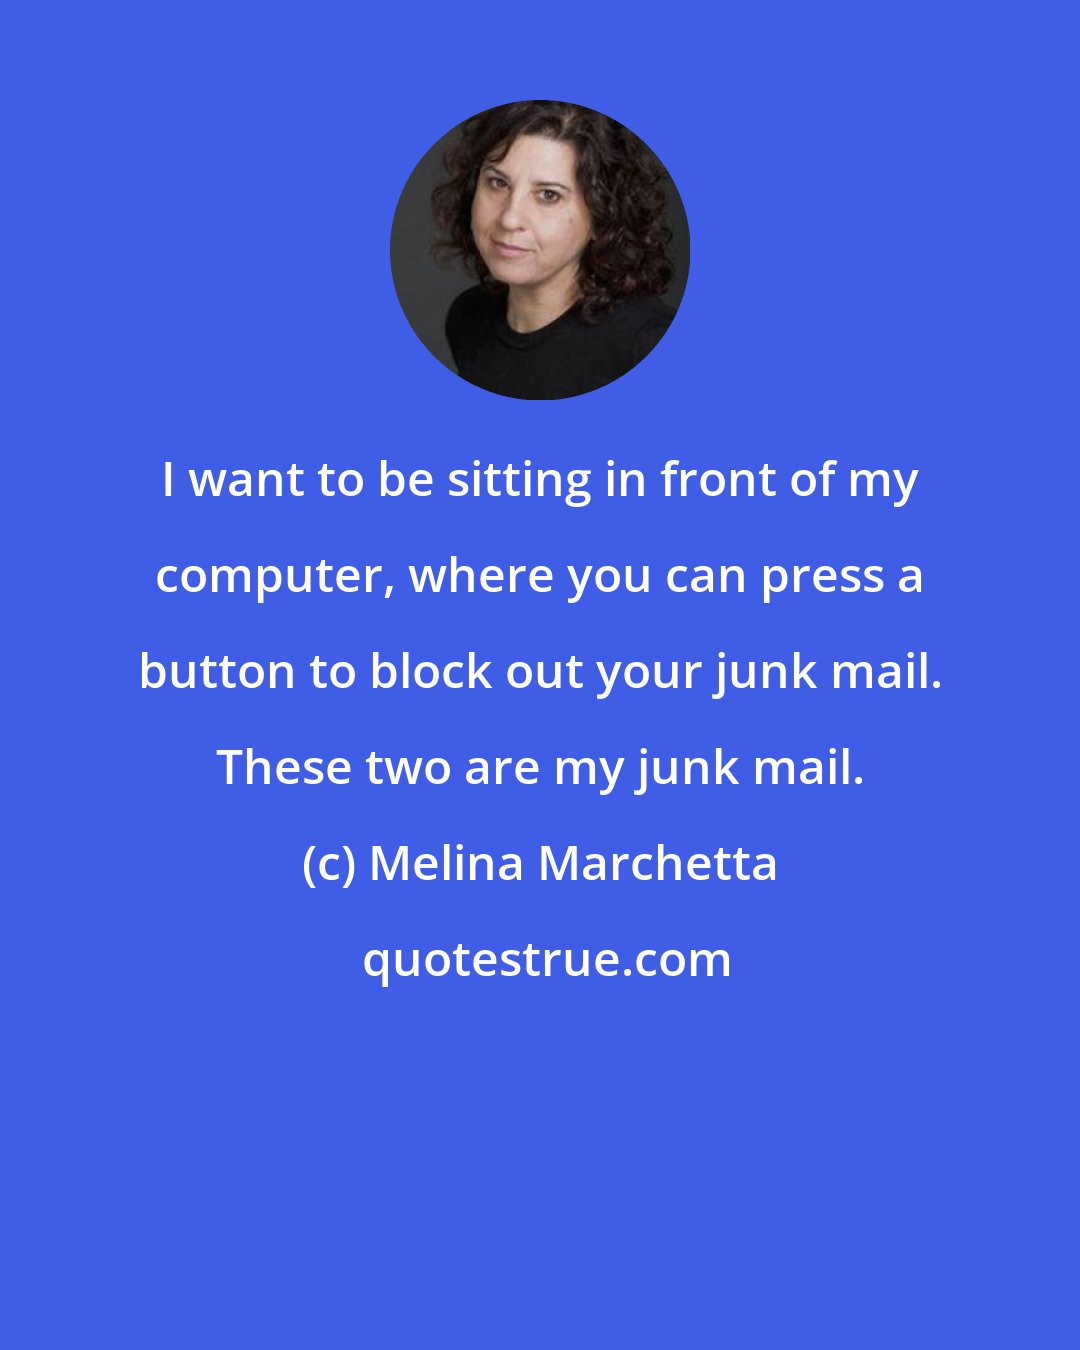 Melina Marchetta: I want to be sitting in front of my computer, where you can press a button to block out your junk mail. These two are my junk mail.